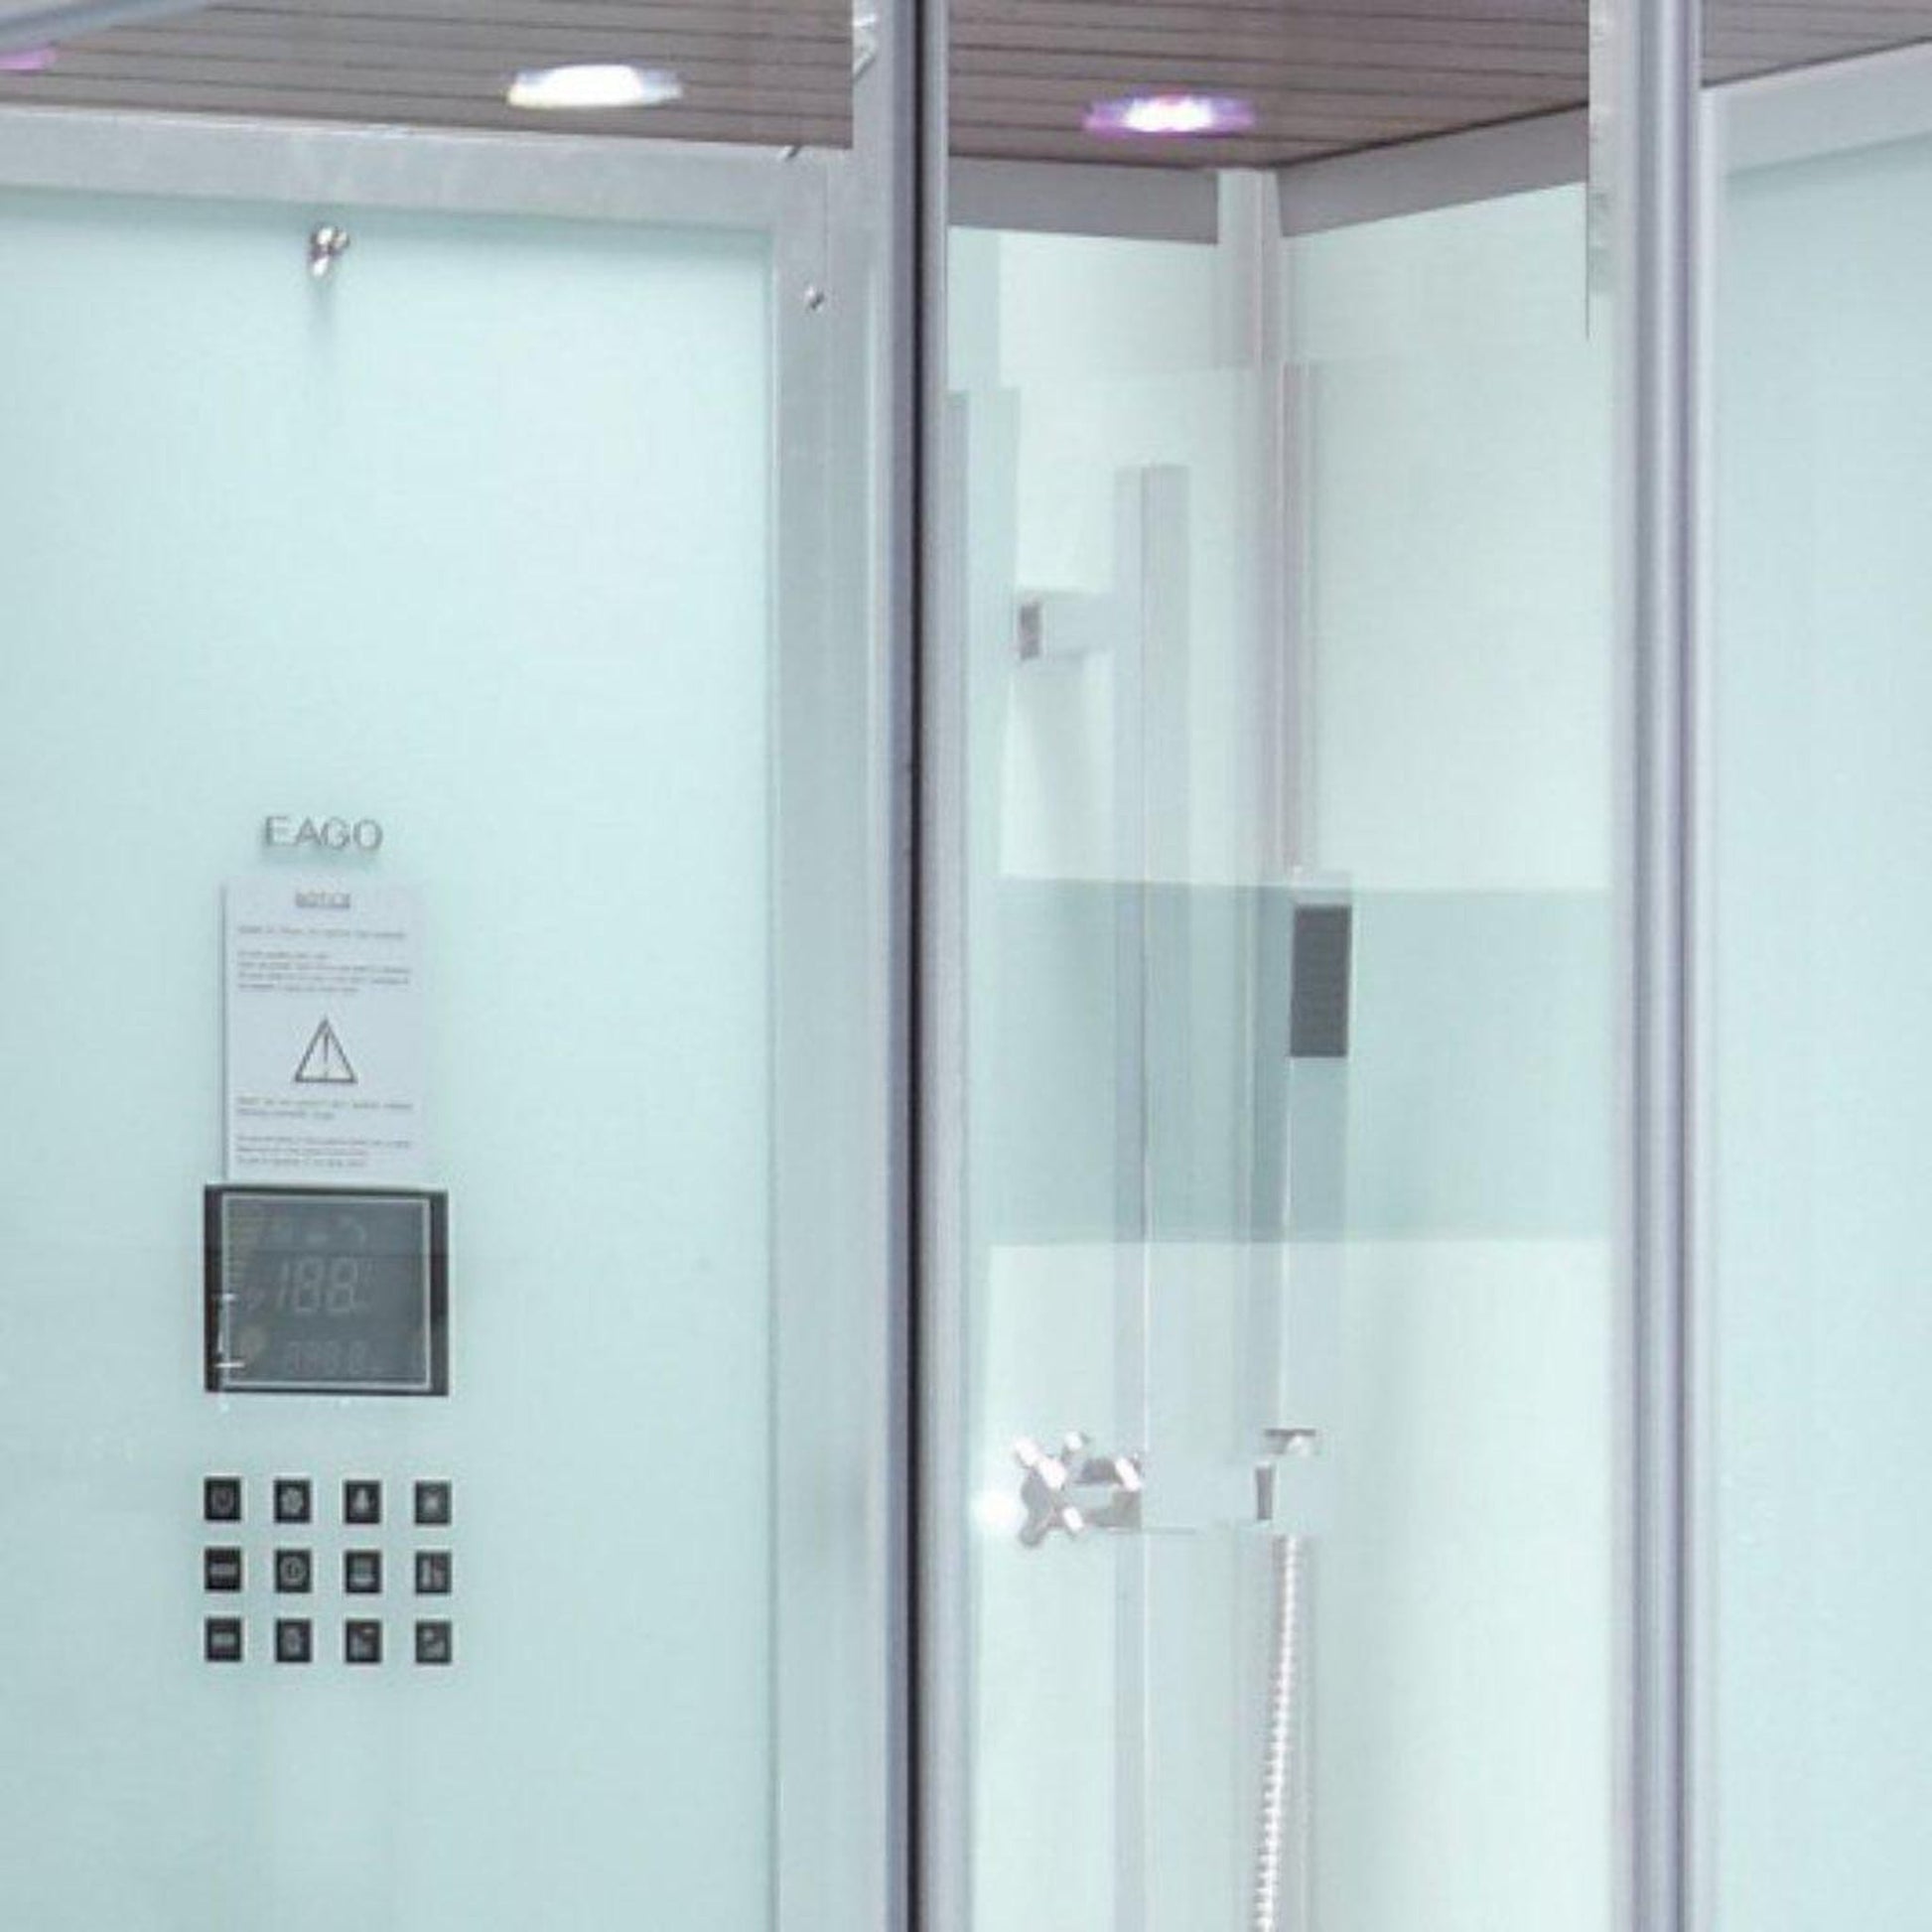 Platinum 59" x 35" x 89" Two-Person White Framed Rectangle Walk-In Steam Shower With Left Handed Control Panel Configuration Hinged Door 6 Massage Jets & LED Chromatherapy Lighting